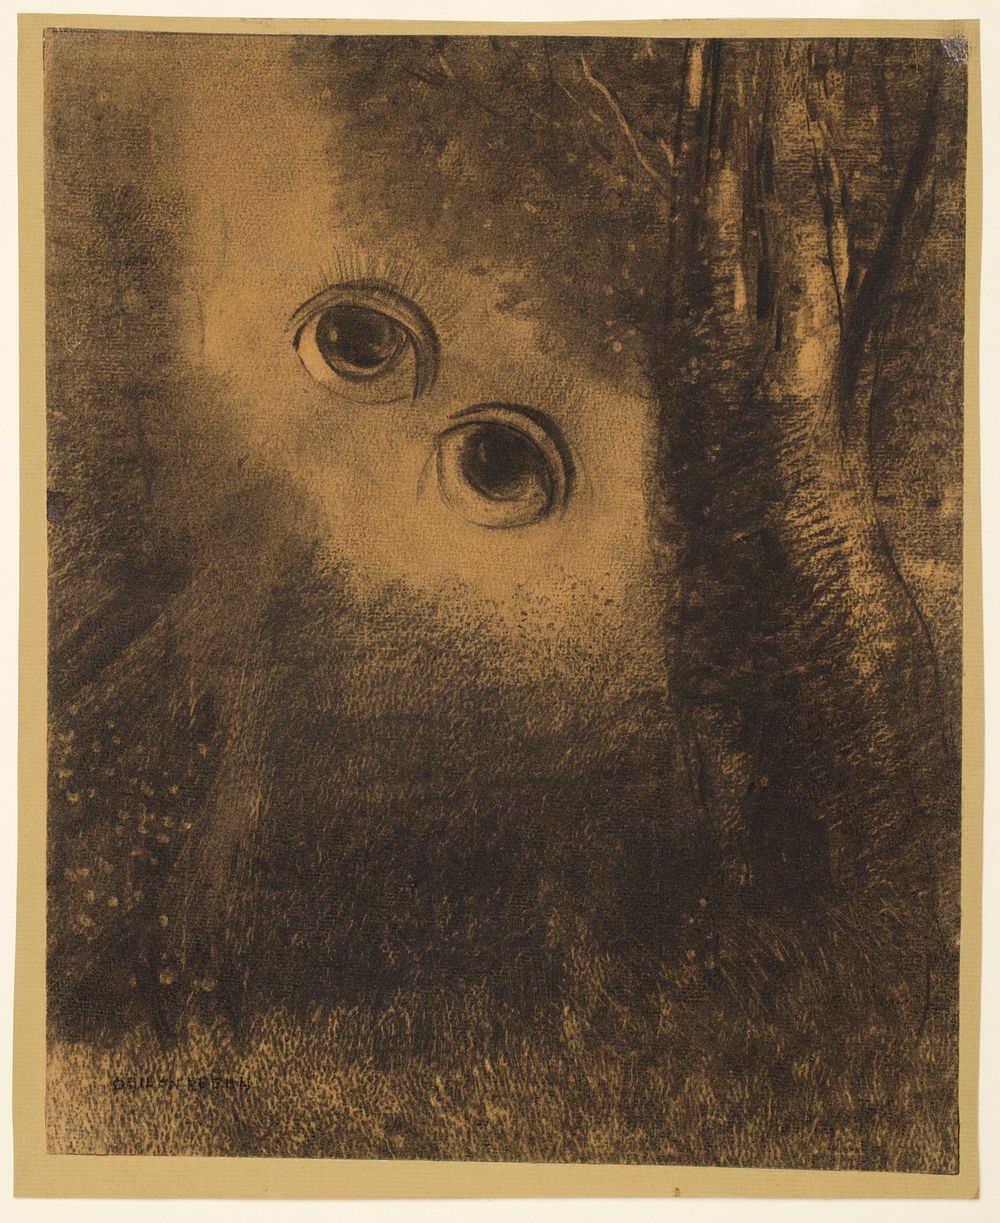 Odilon Redon's Eyes in the Forest